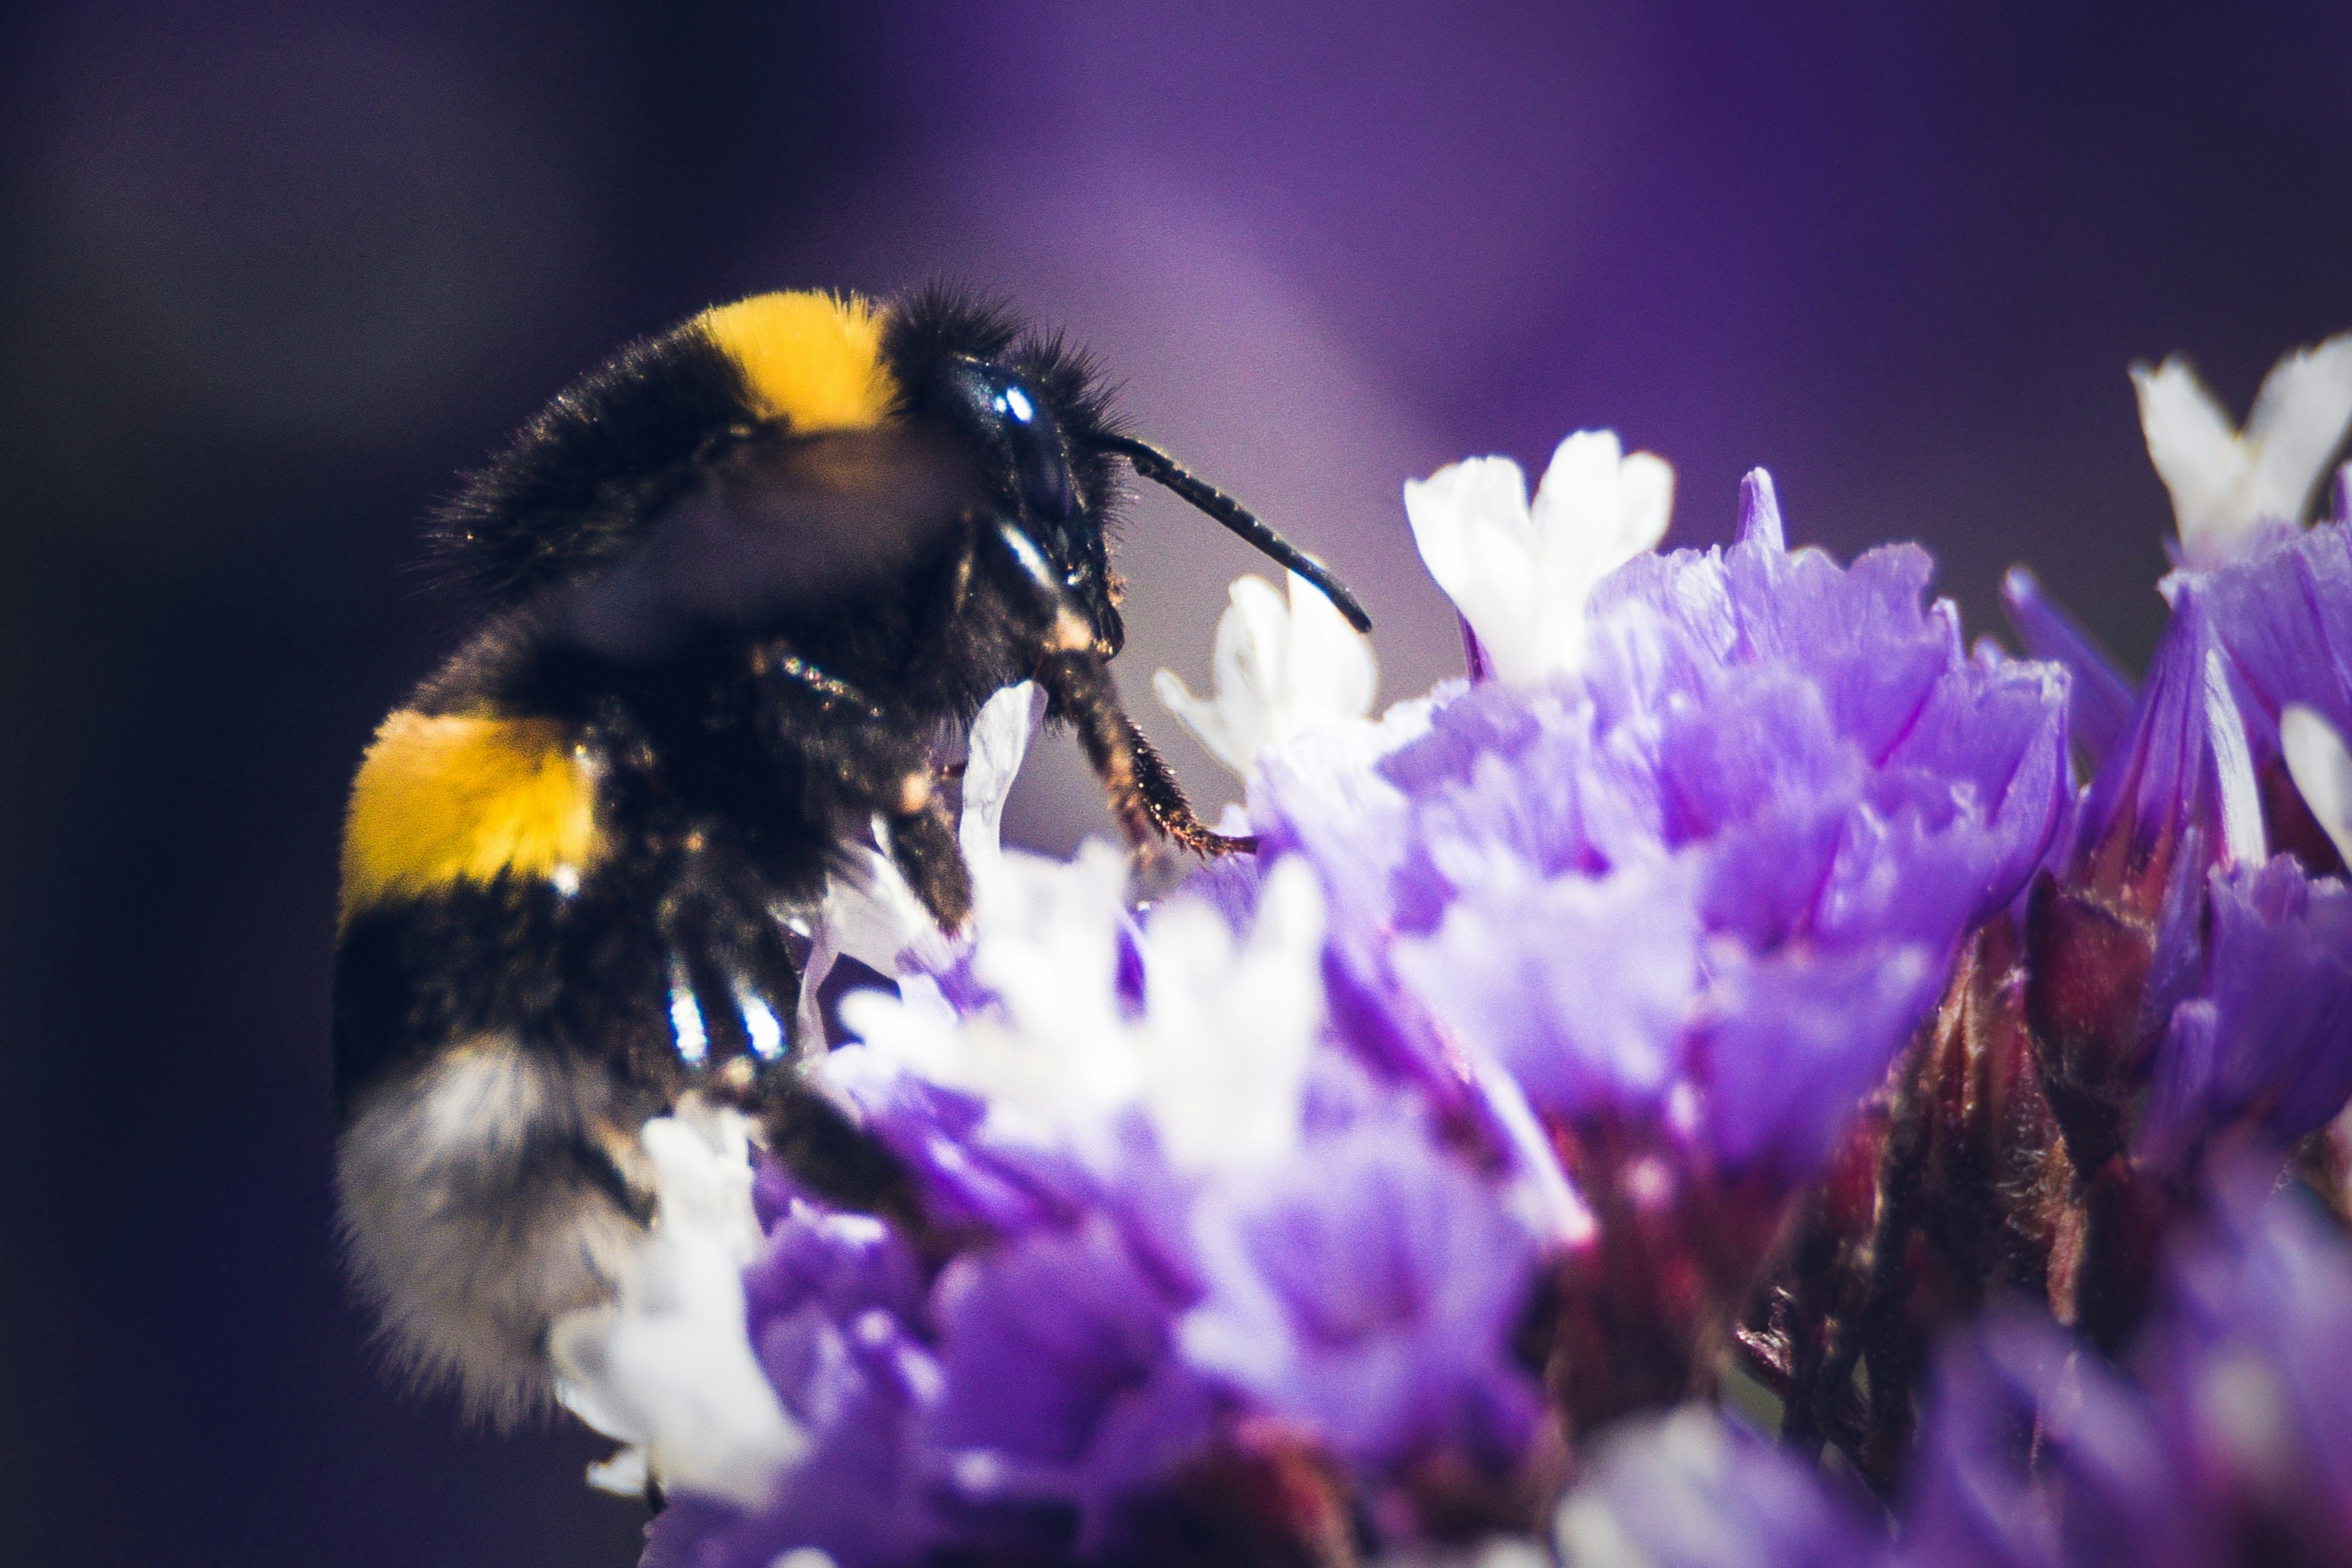 close-up of a bumblebee feeding on a purple flower